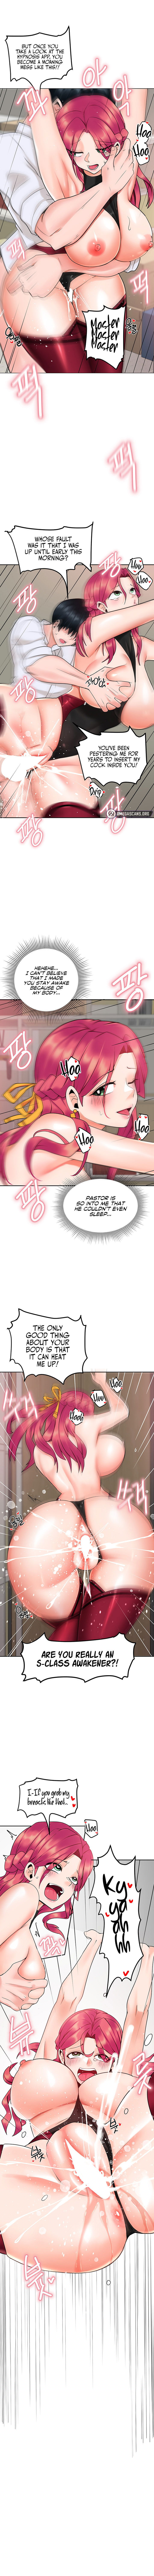 the-hypnosis-app-was-fake-chap-8-6